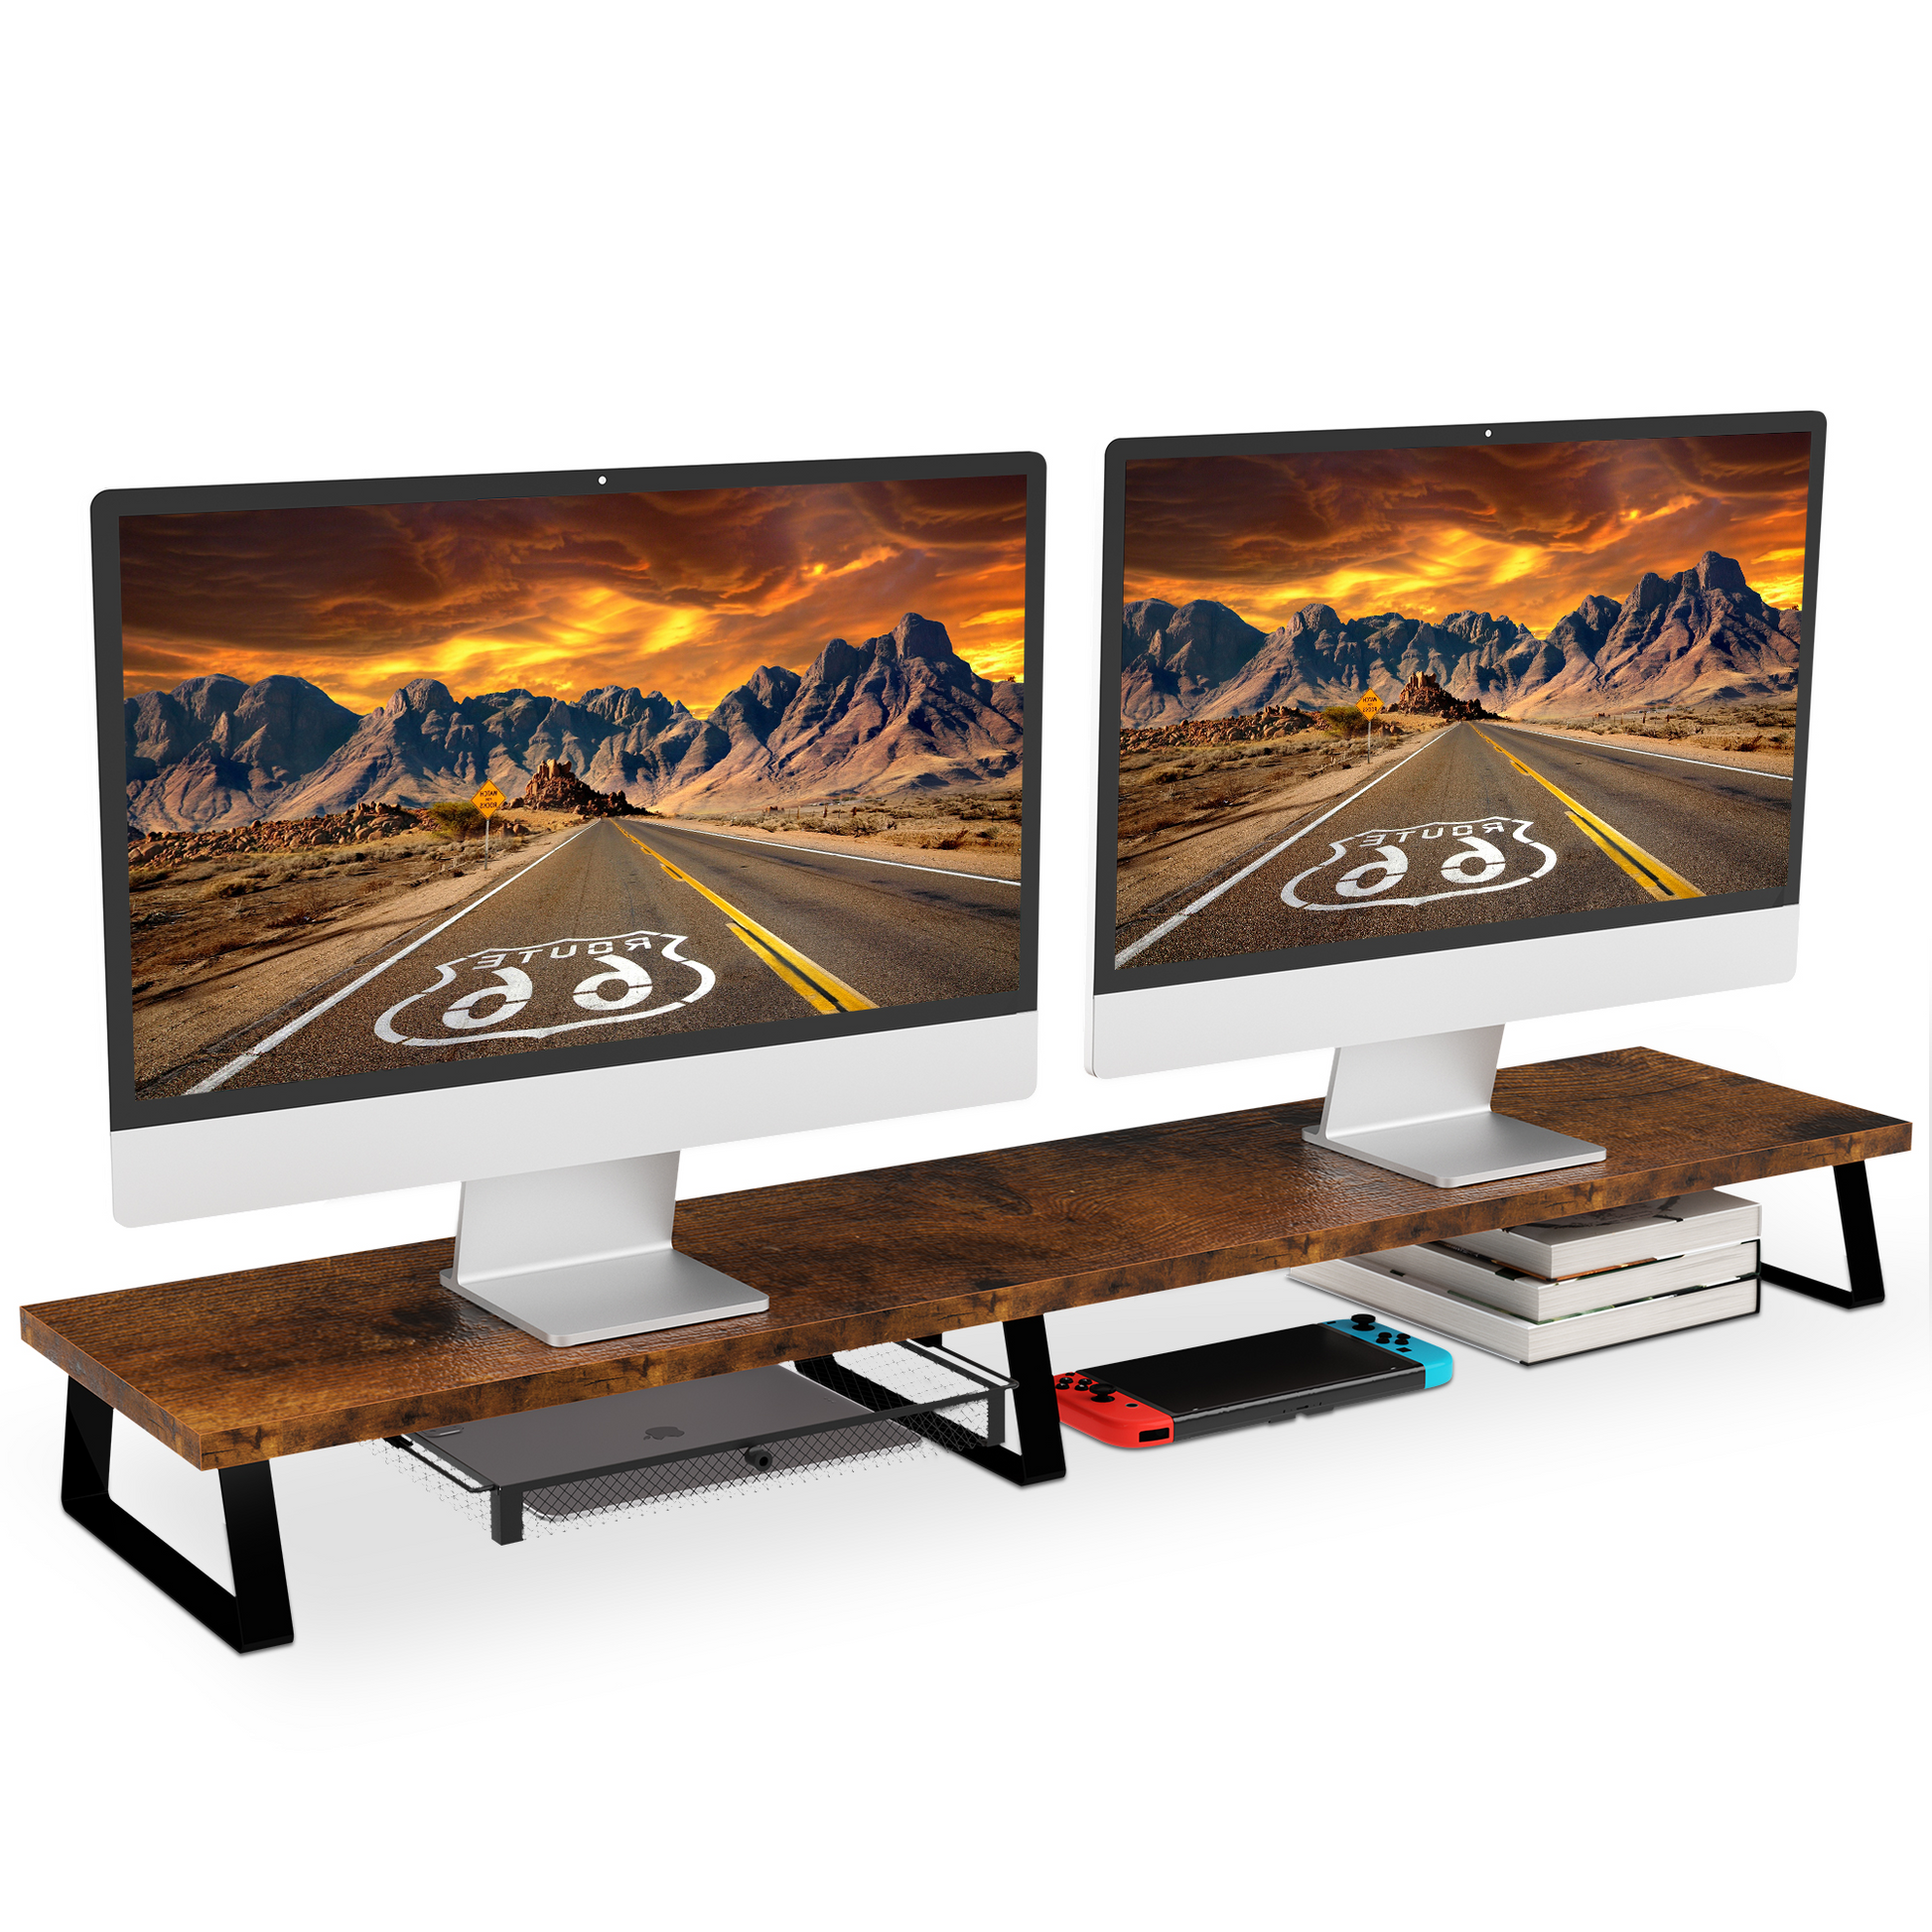 Aothia Dual Monitor Stand For Desk with Metal Legs